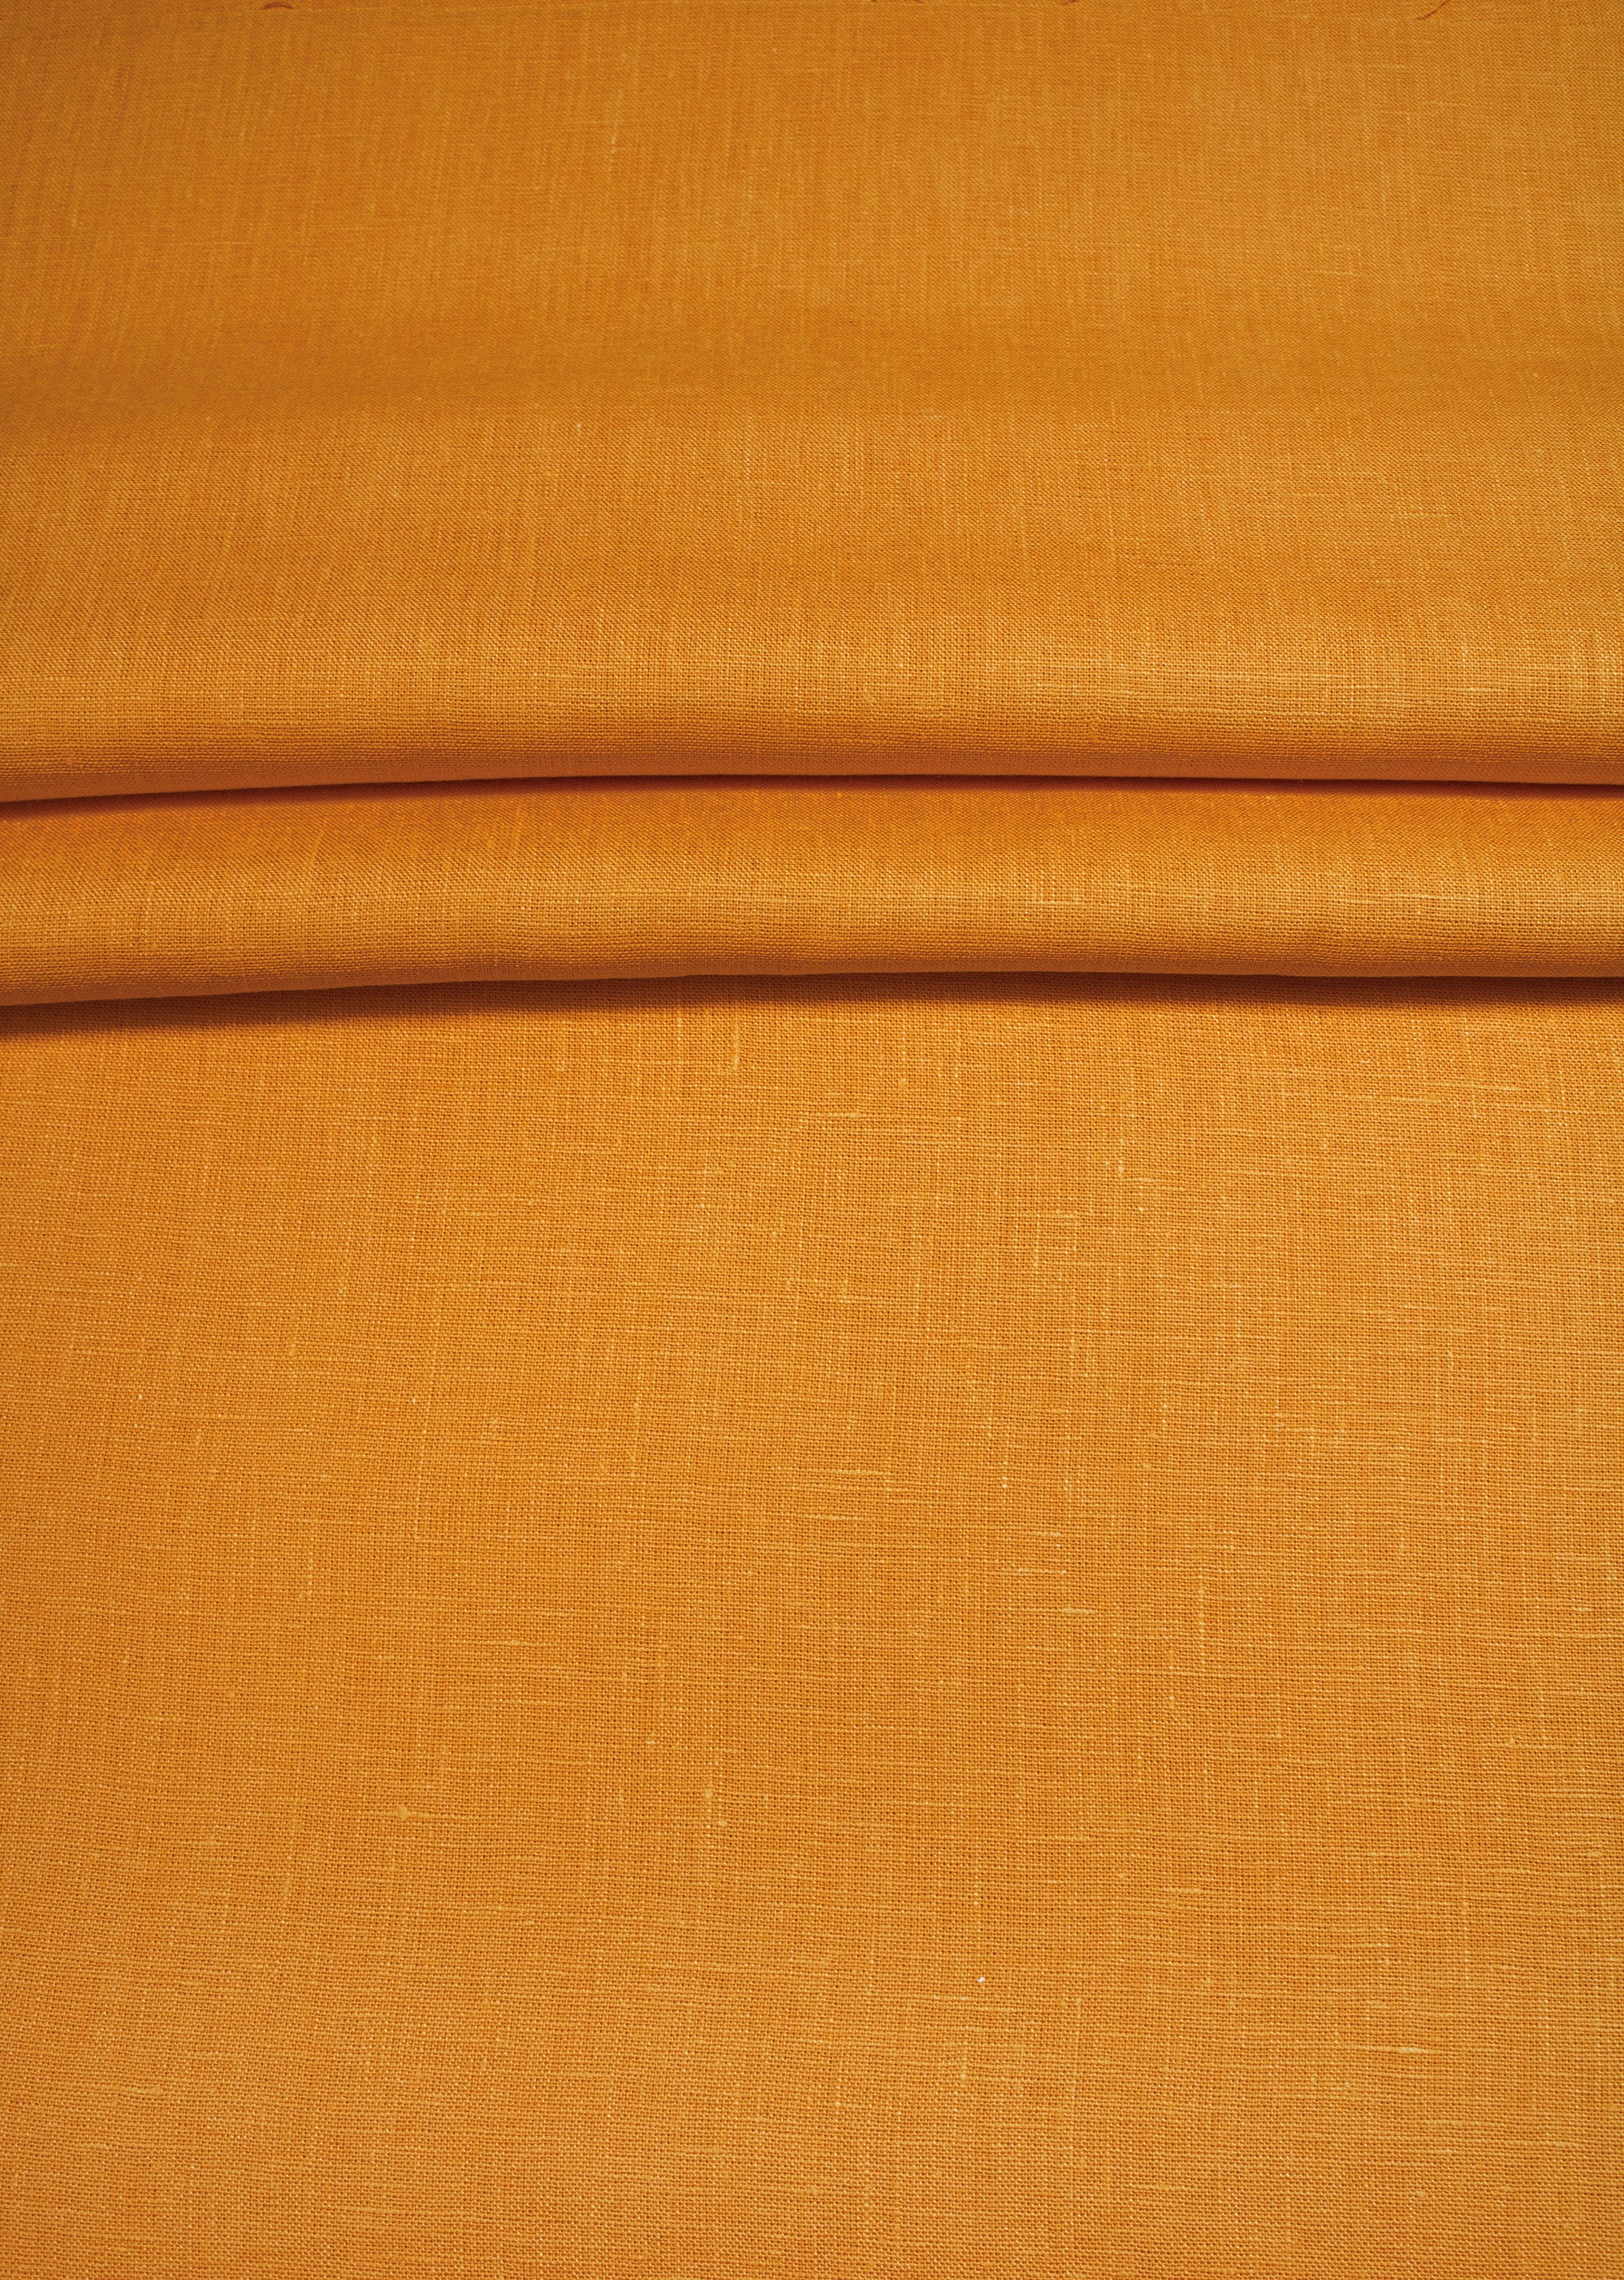 Luca-S Pure Natural 100% Linen Soft Fabric